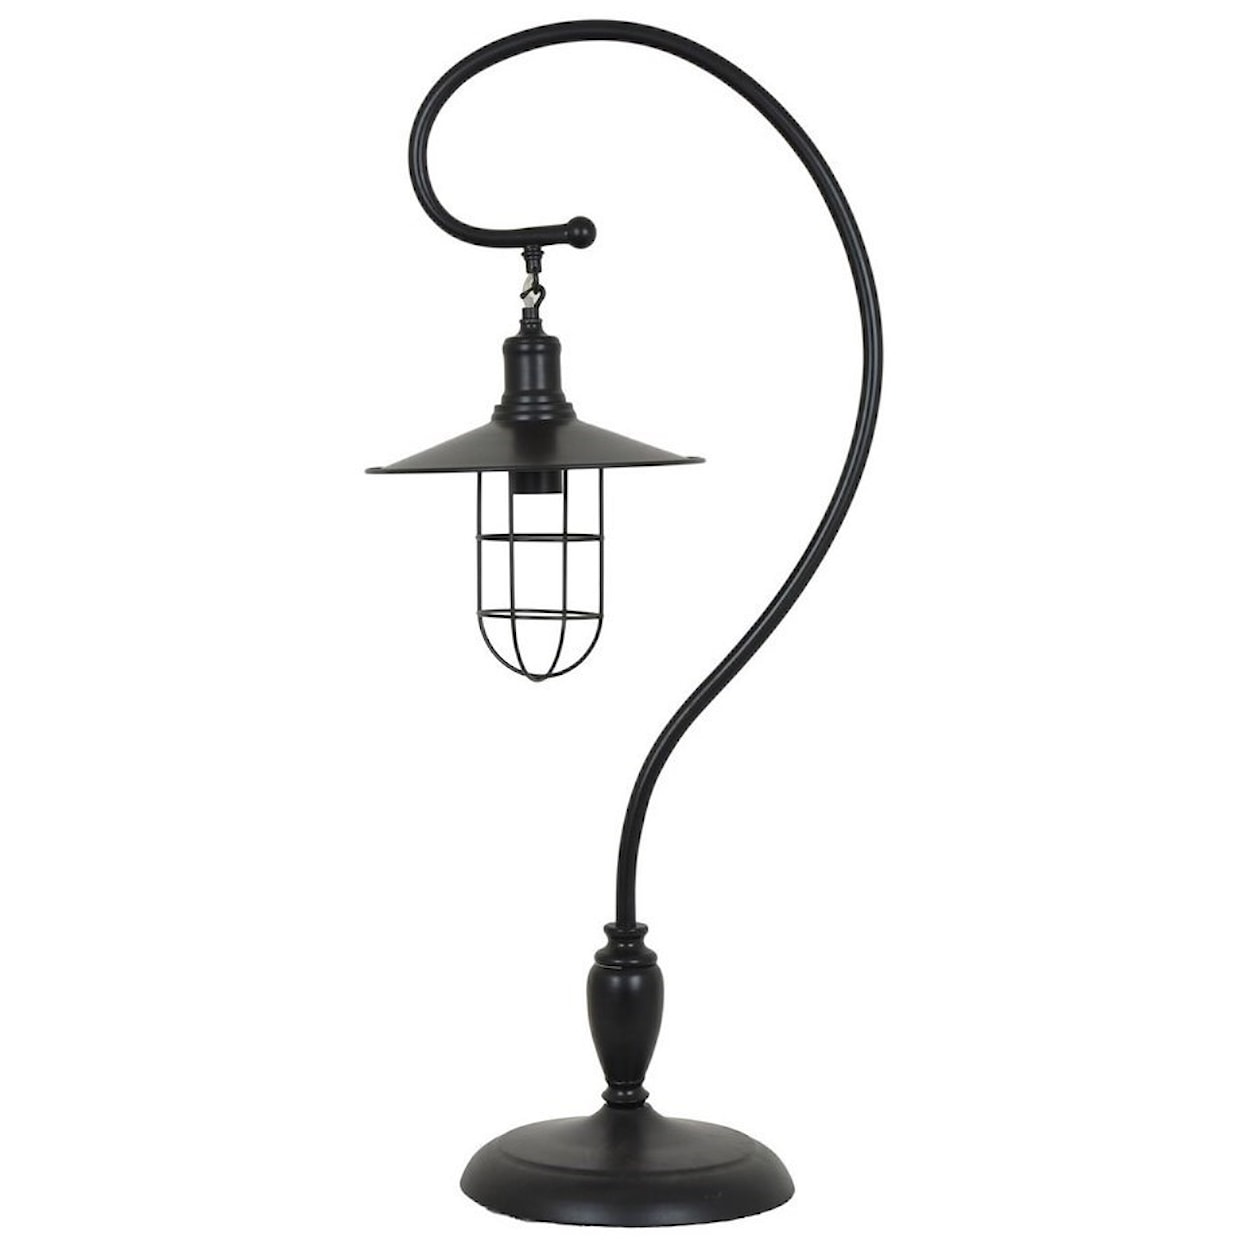 Crestview Collection Lighting Harbor Side Table Lamp